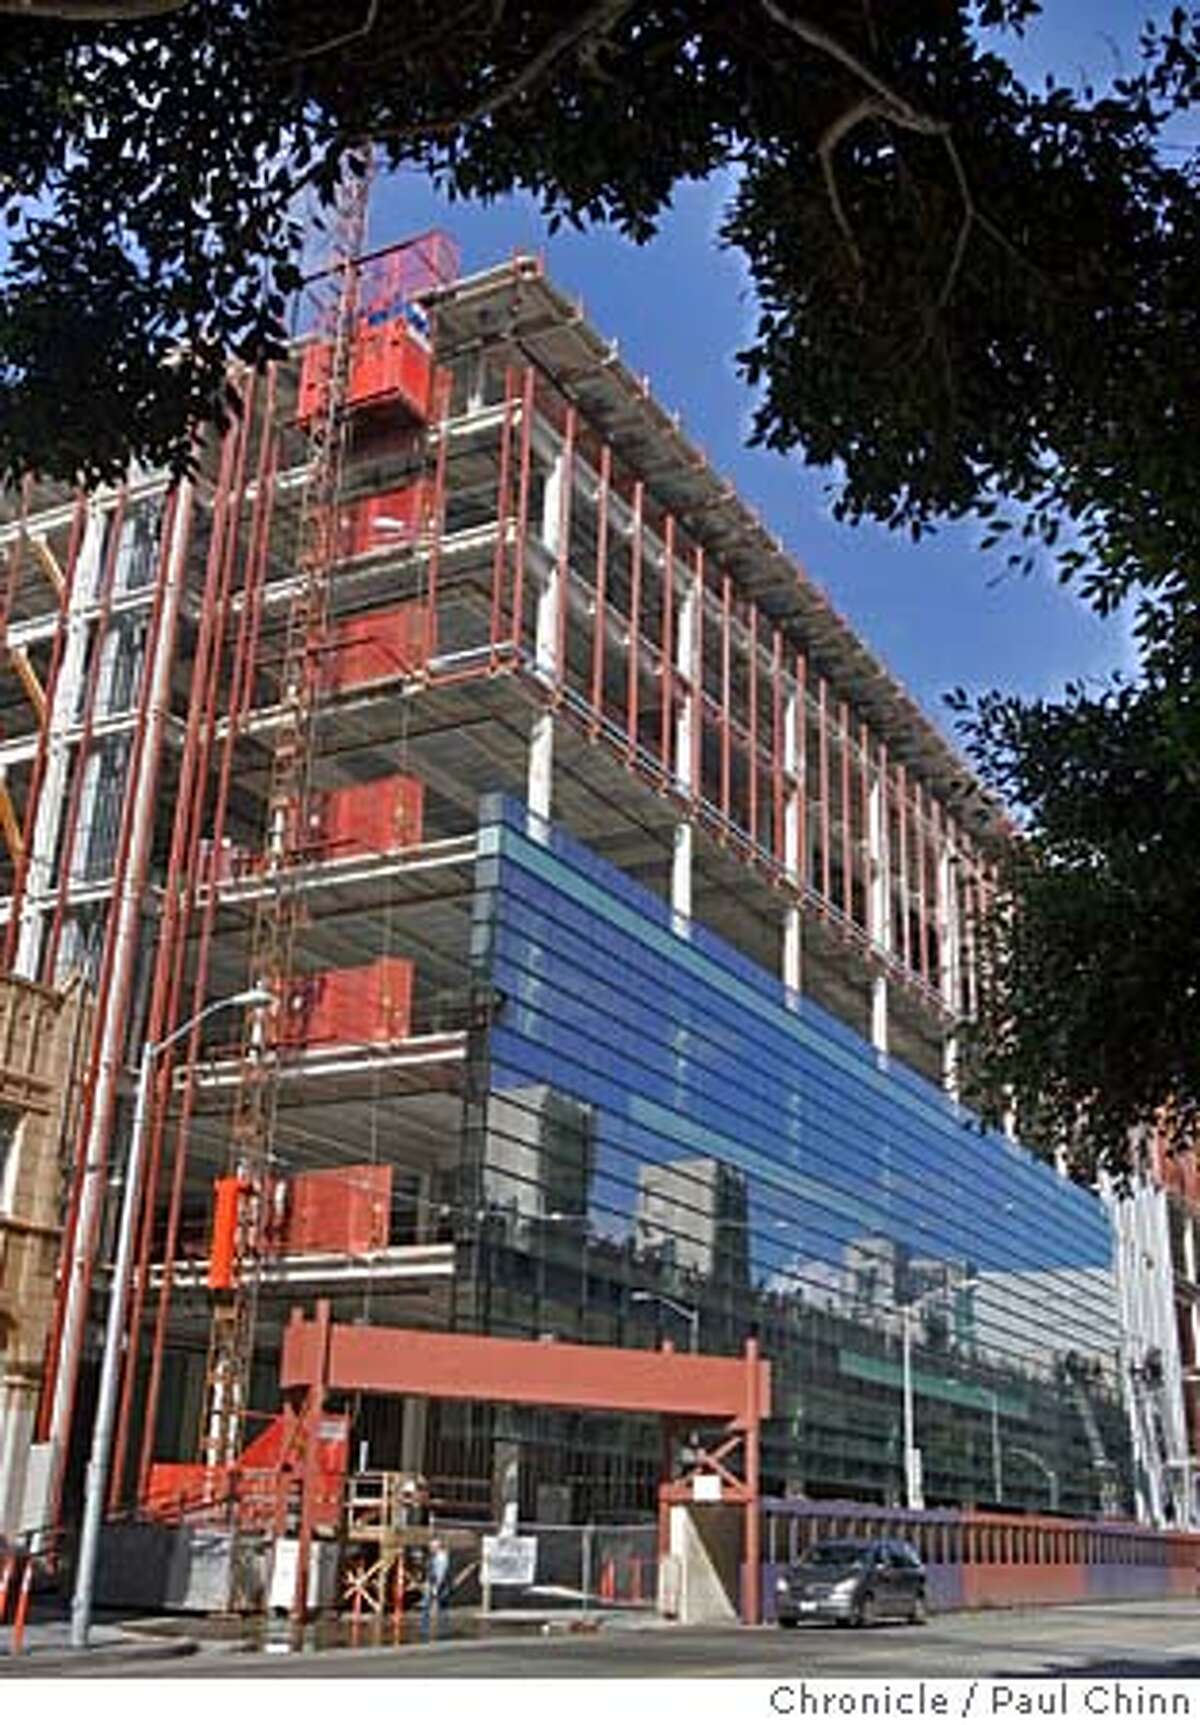 bloomingdale19_036_pc.jpg Several large glass panels have been attached to the Mission St. facade of the Bloomingdale's project on 2/18/05 in San Francisco, CA. PAUL CHINN/The Chronicle MANDATORY CREDIT FOR PHOTOG AND S.F. CHRONICLE/ - MAGS OUT